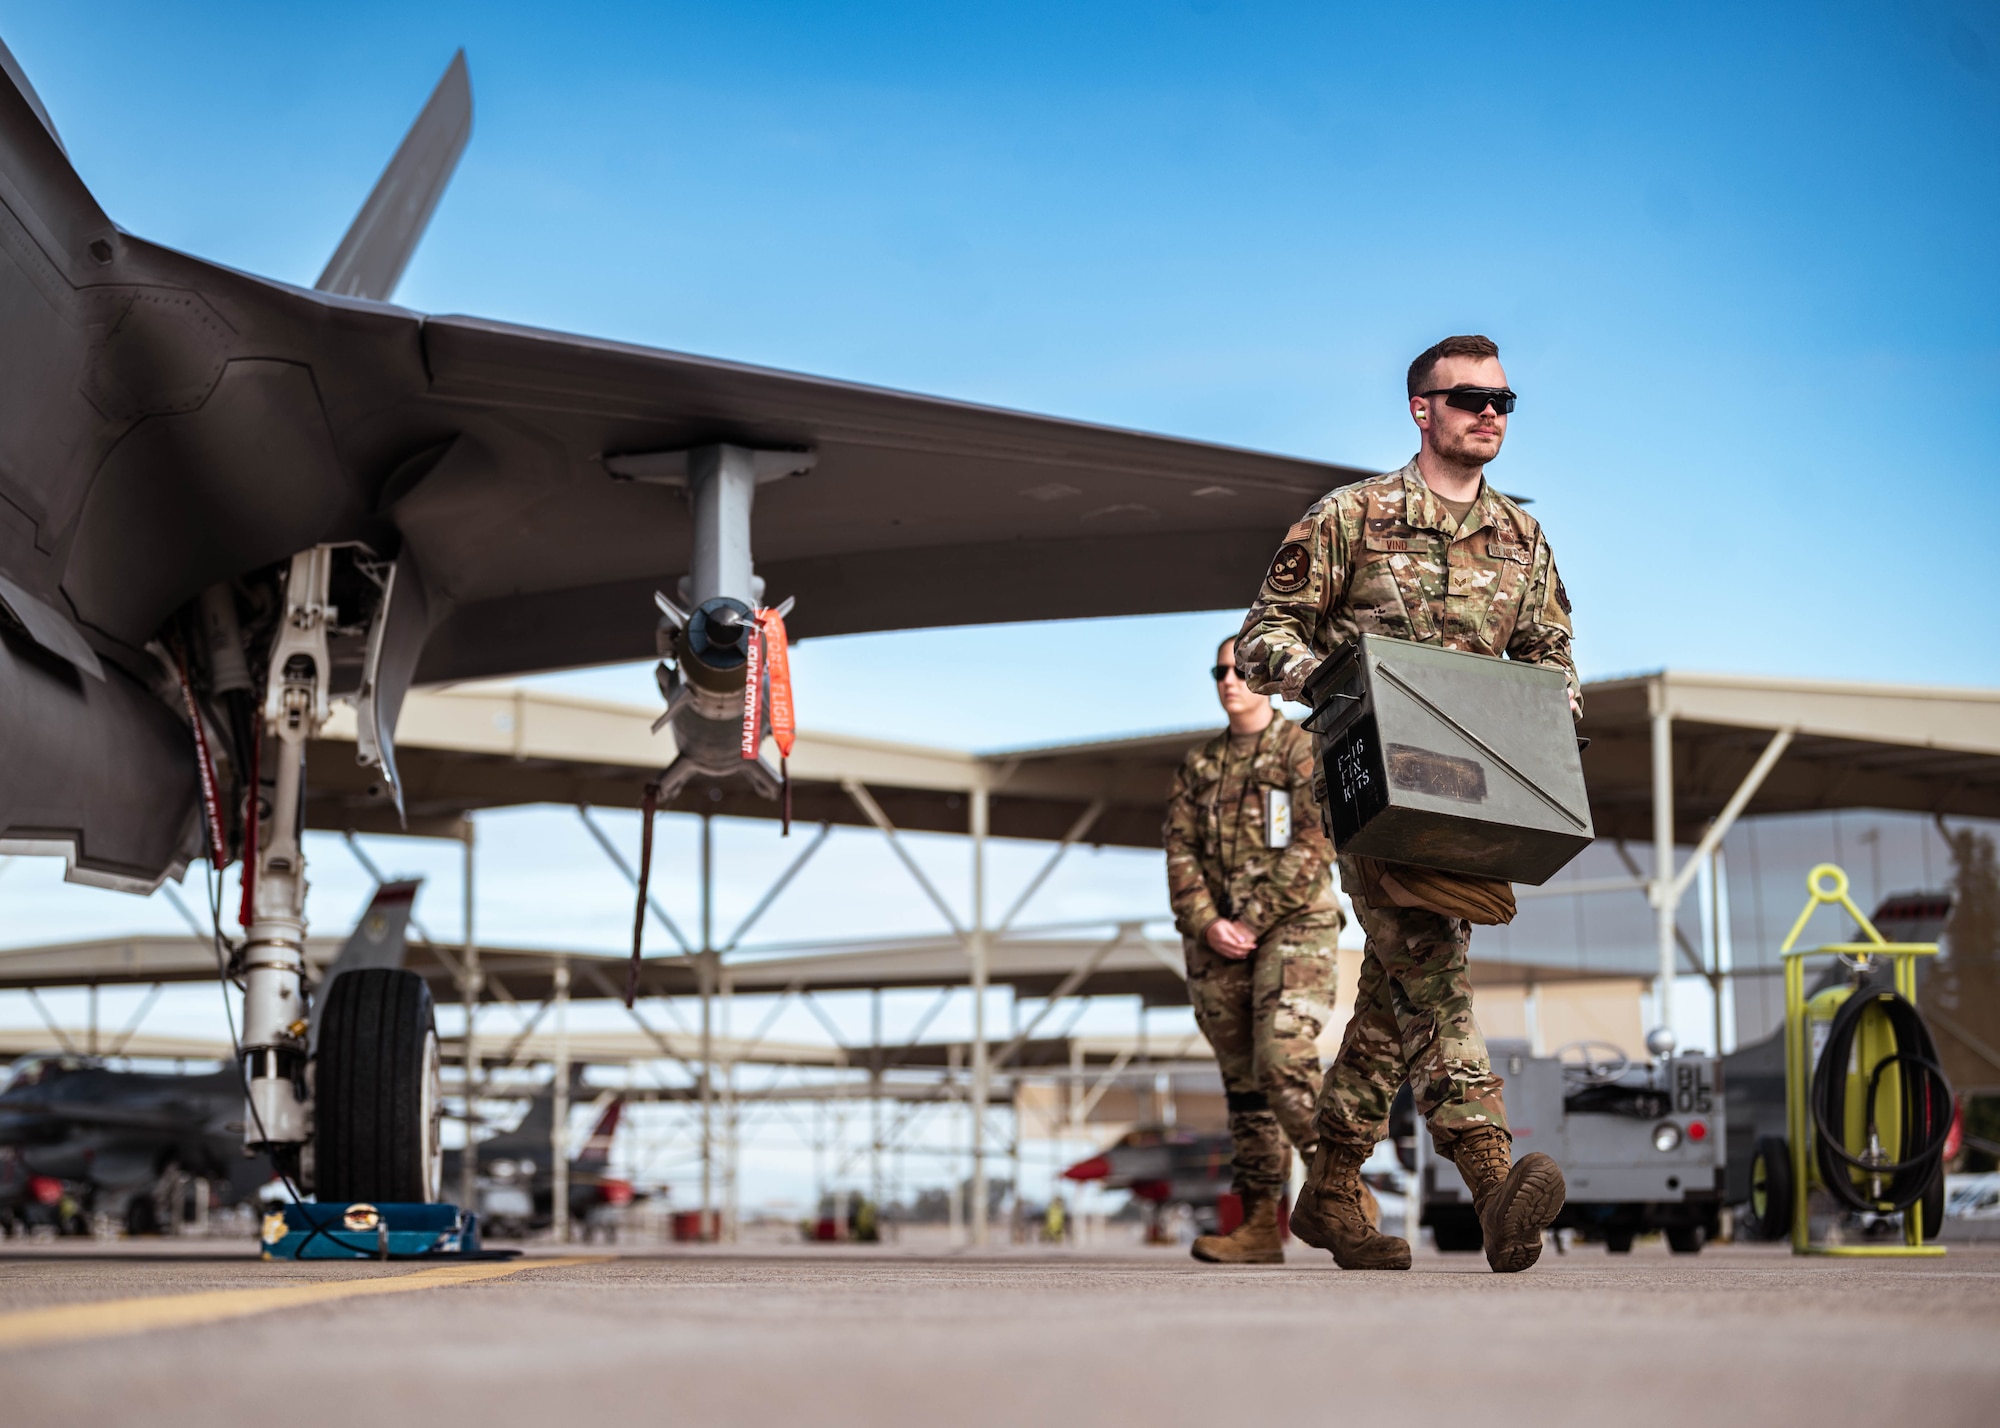 U.S. Air Force Senior Airman Aaron Vind, 62nd Aircraft Maintenance Unit weapons load crew member, hauls equipment during the annual weapons load competition.